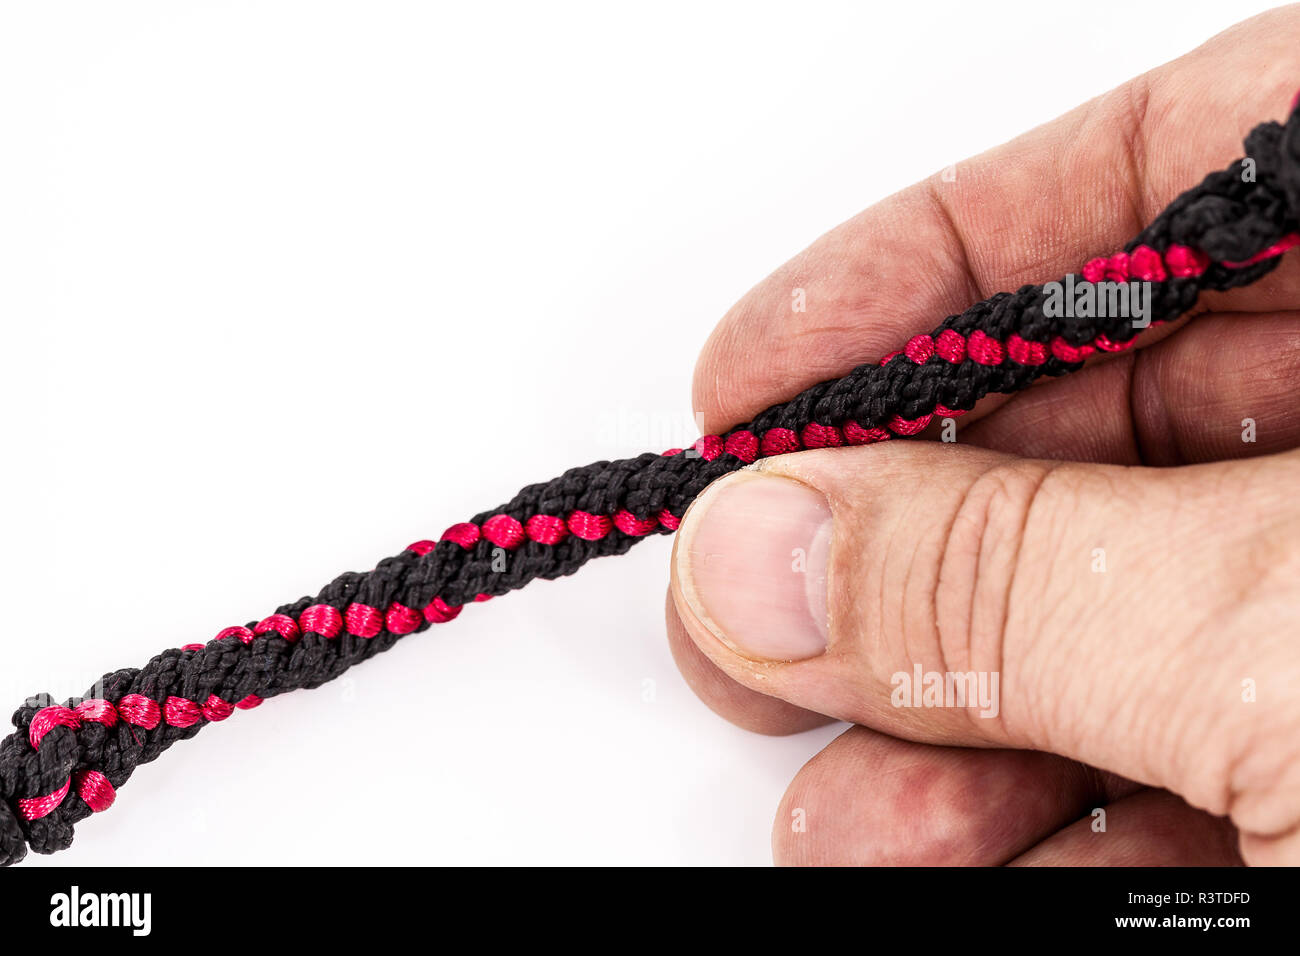 the red thread,held like a pen. Stock Photo